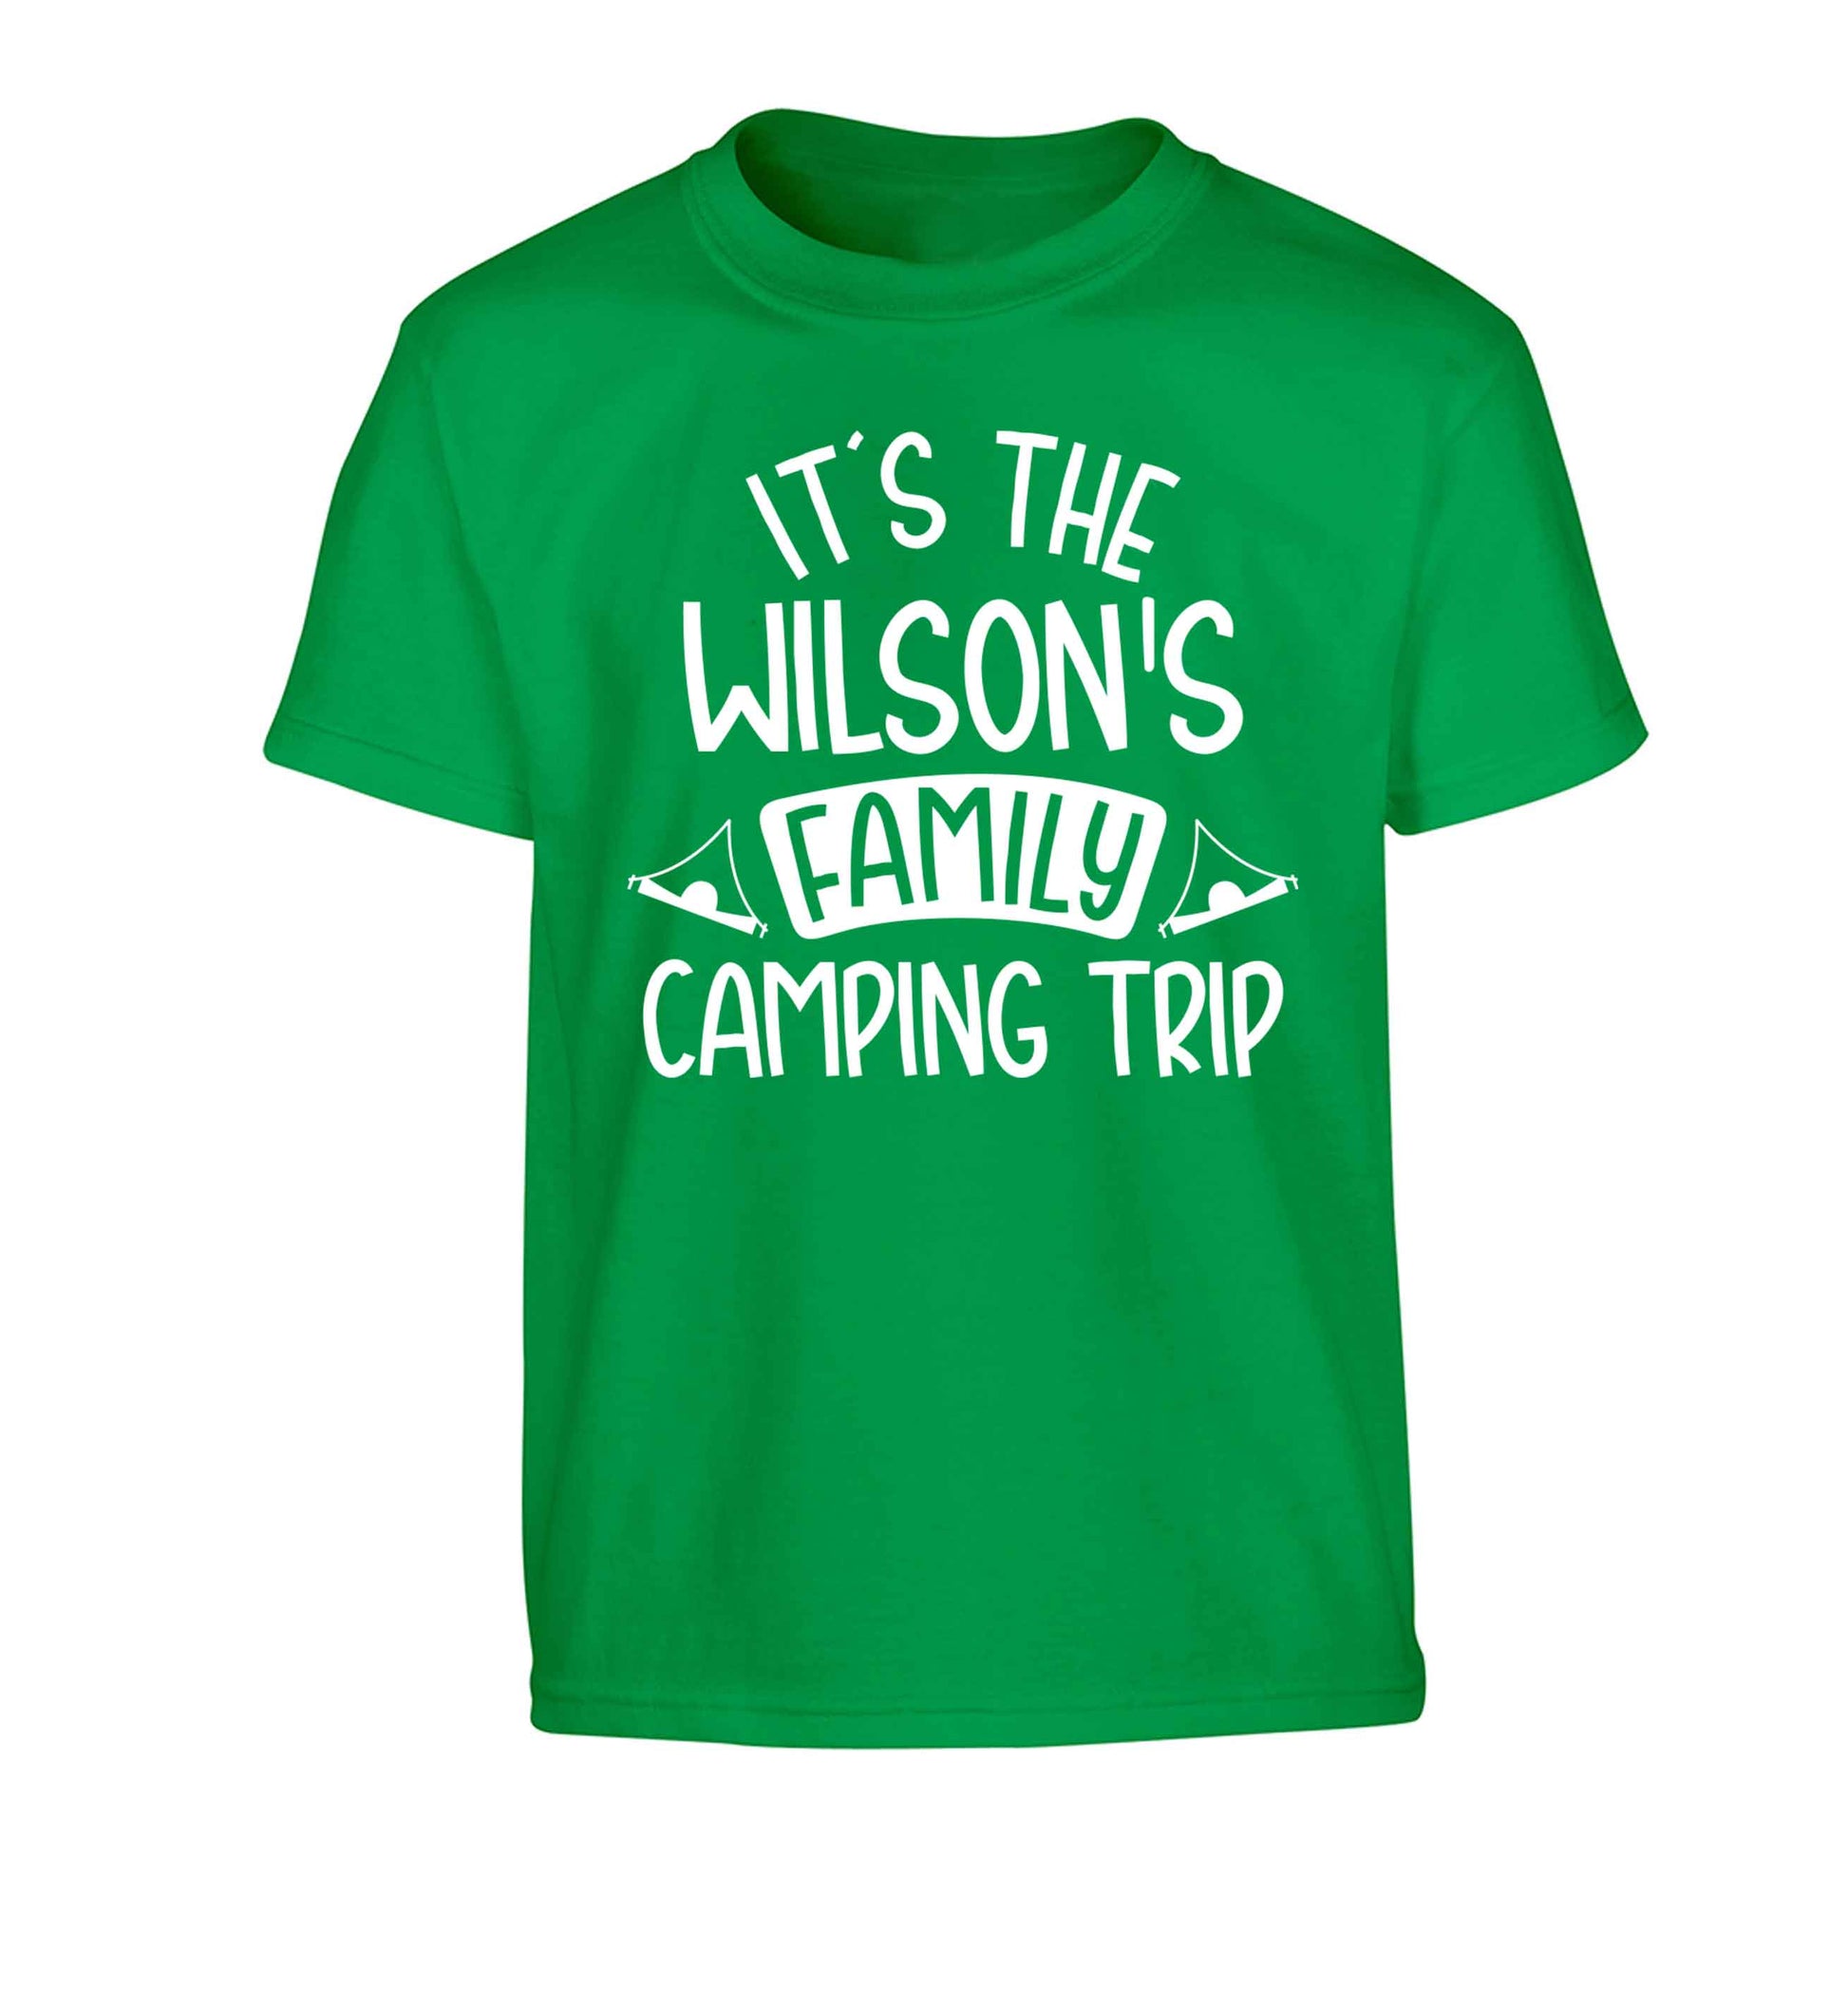 It's the Wilson's family camping trip personalised Children's green Tshirt 12-13 Years